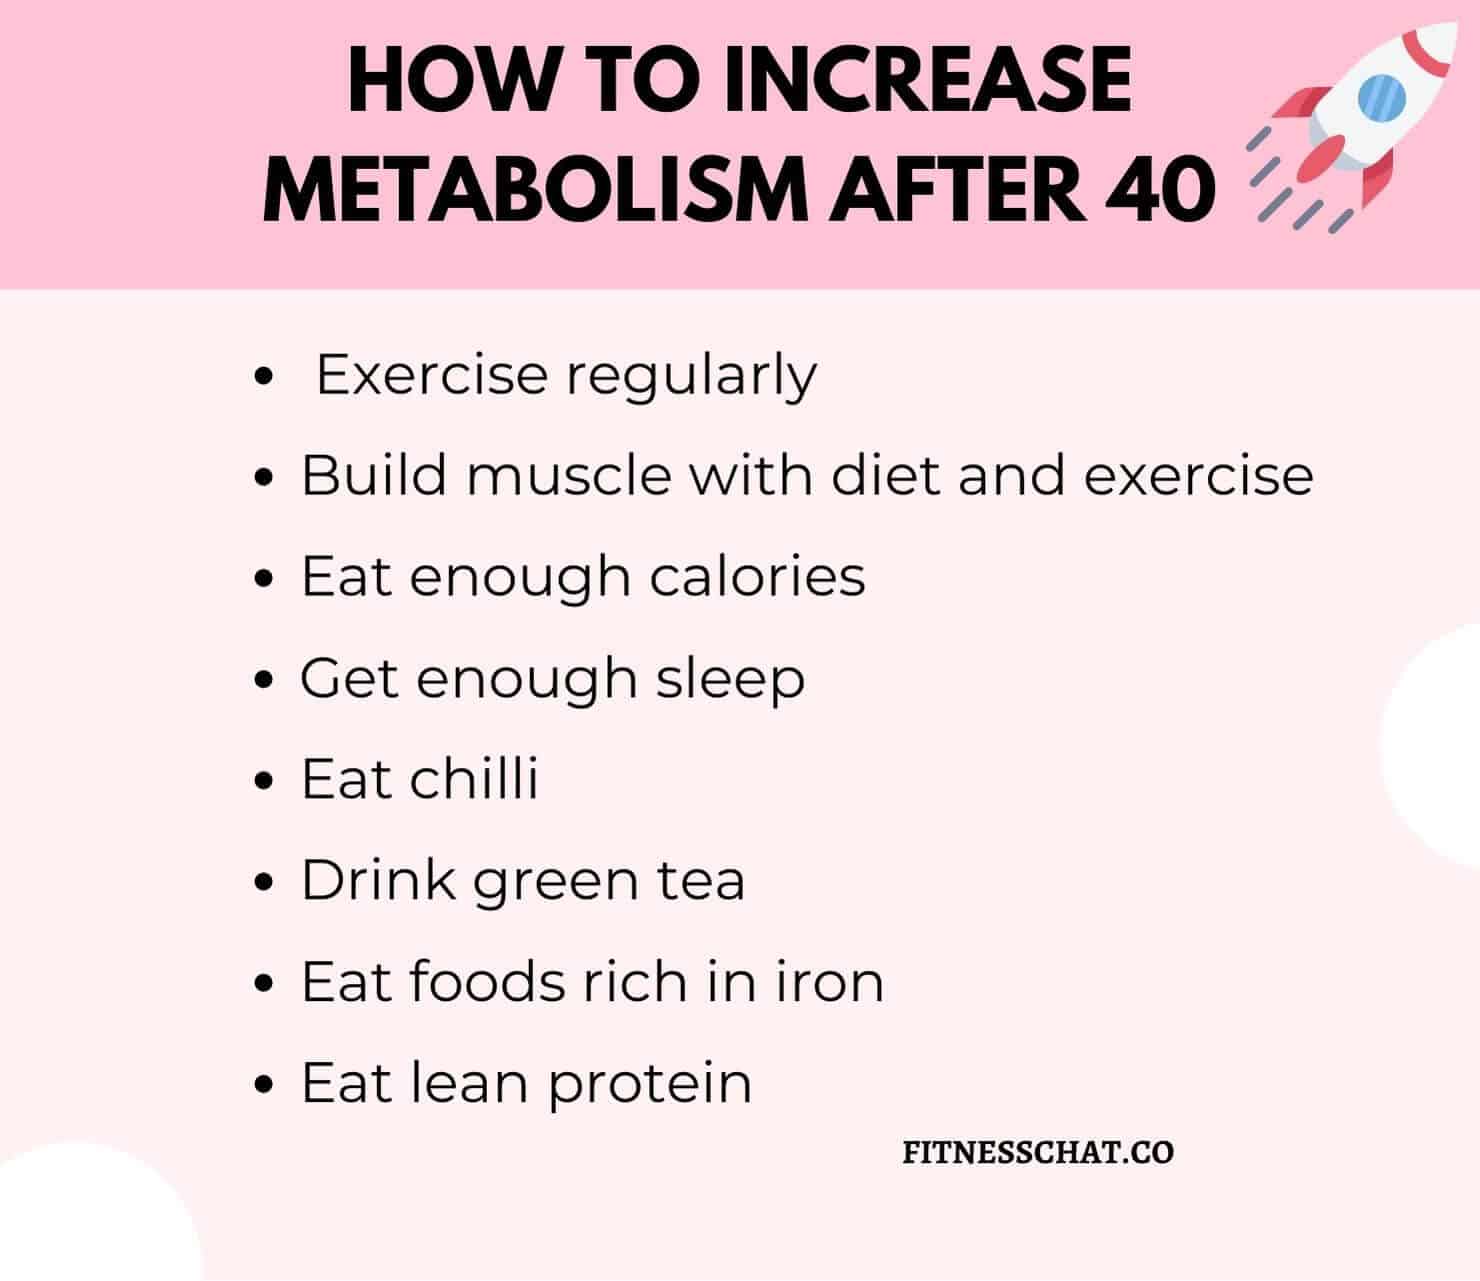 how to increase metabolism after 40 female 